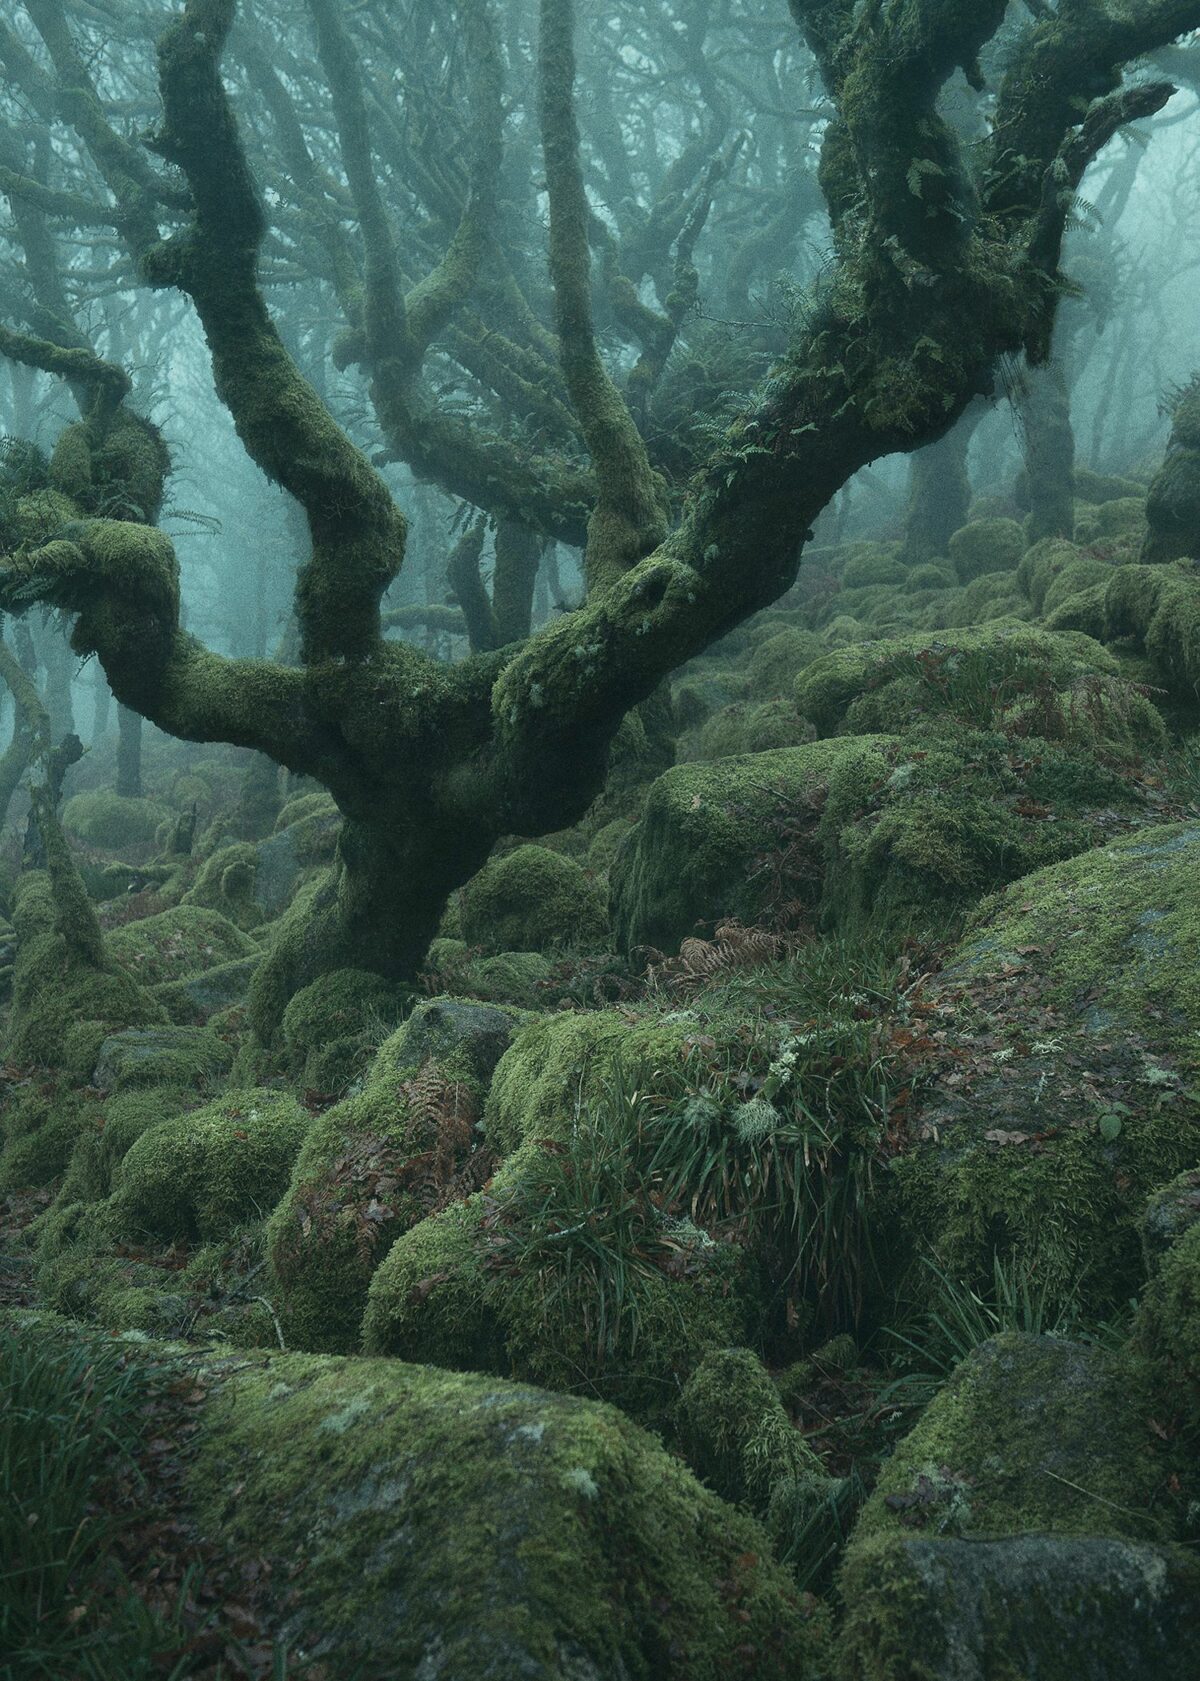 Mystical Enchanting Photography Series Of Mossy And Foggy Forests By Neil Burnell 10